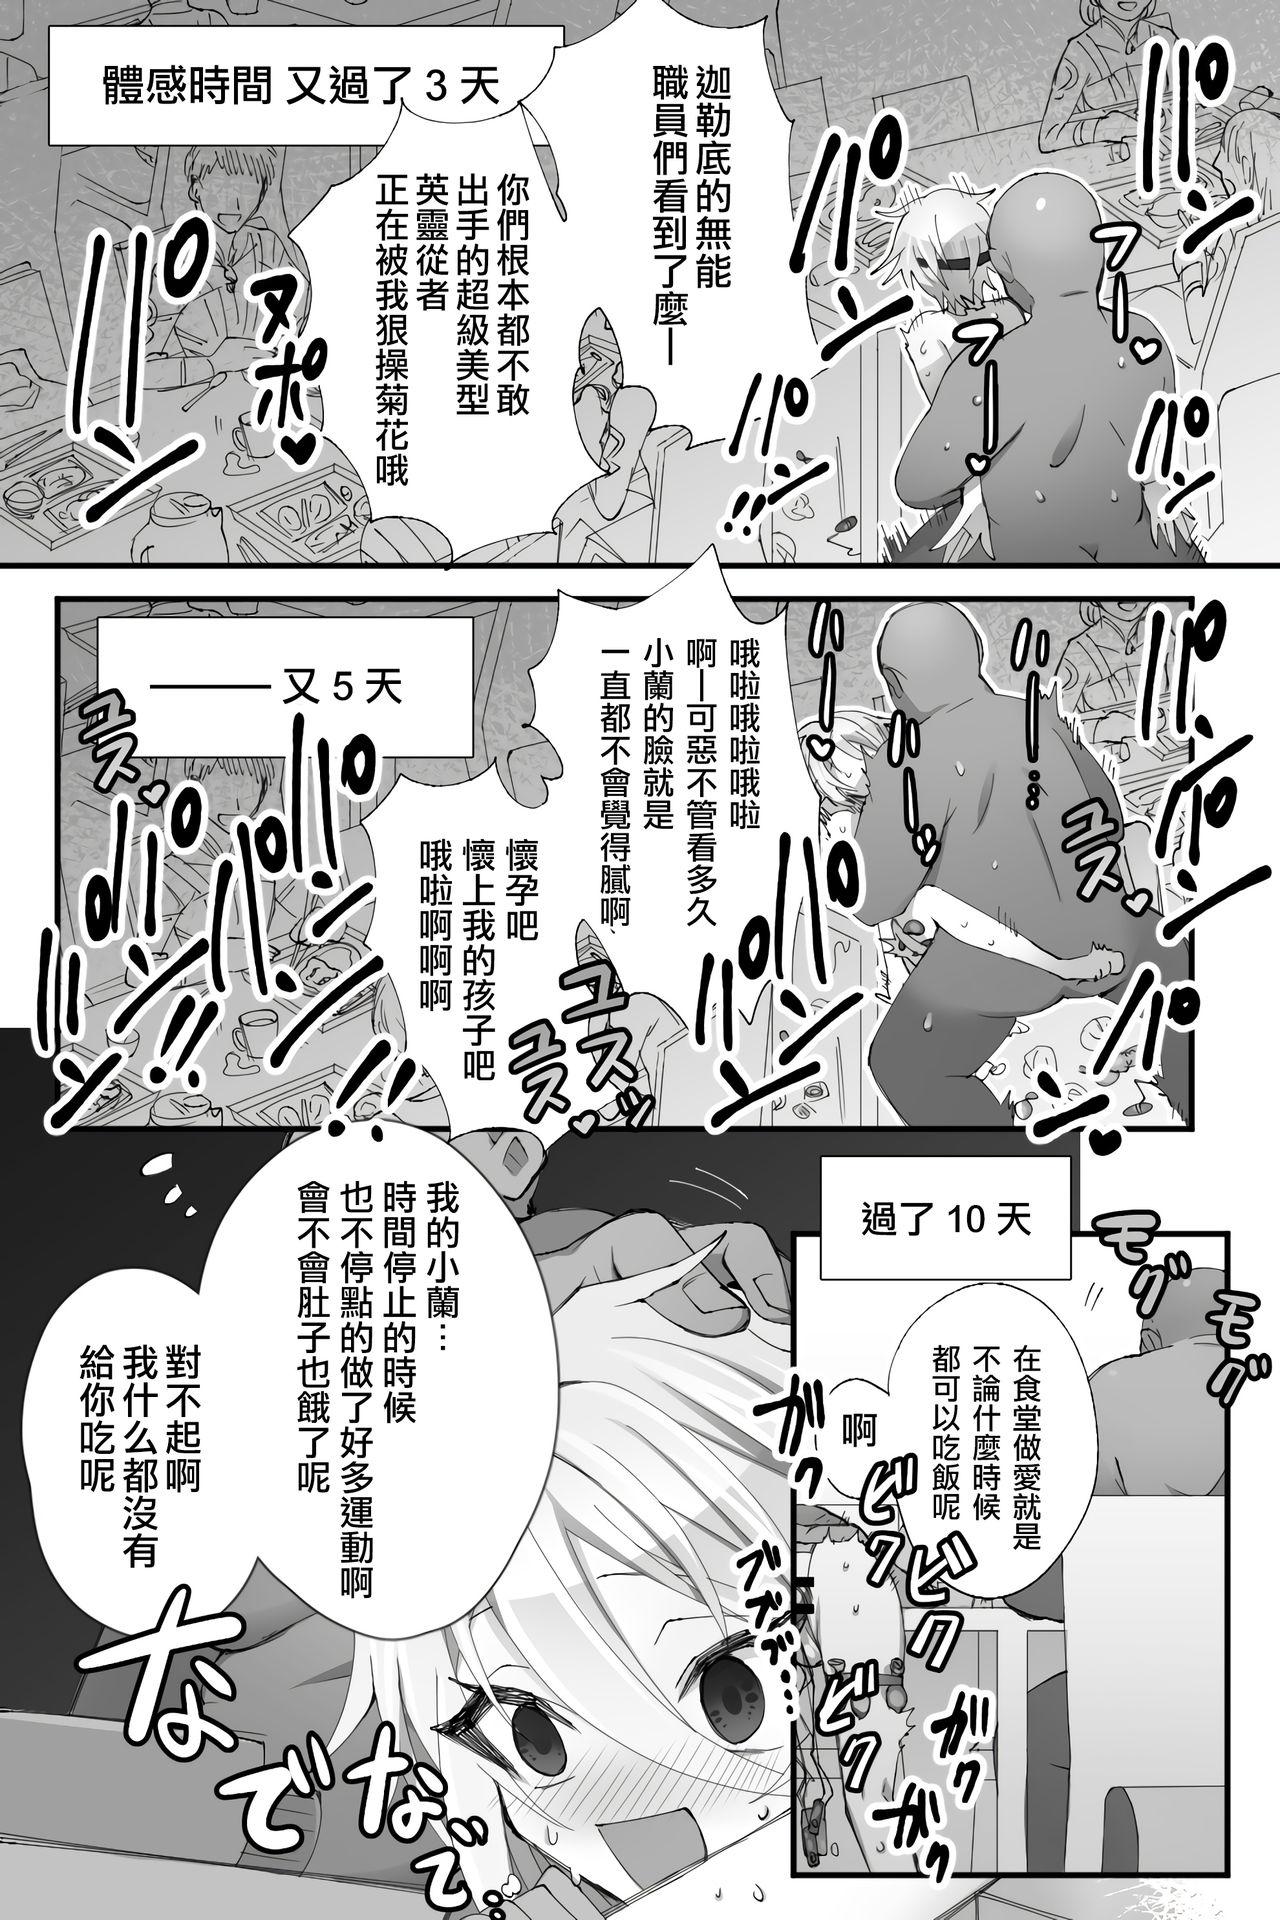 Small Tits Porn Tokitome in Chaldea | 时间停止IN迦勒底 - Fate grand order Amateur Vids - Page 7